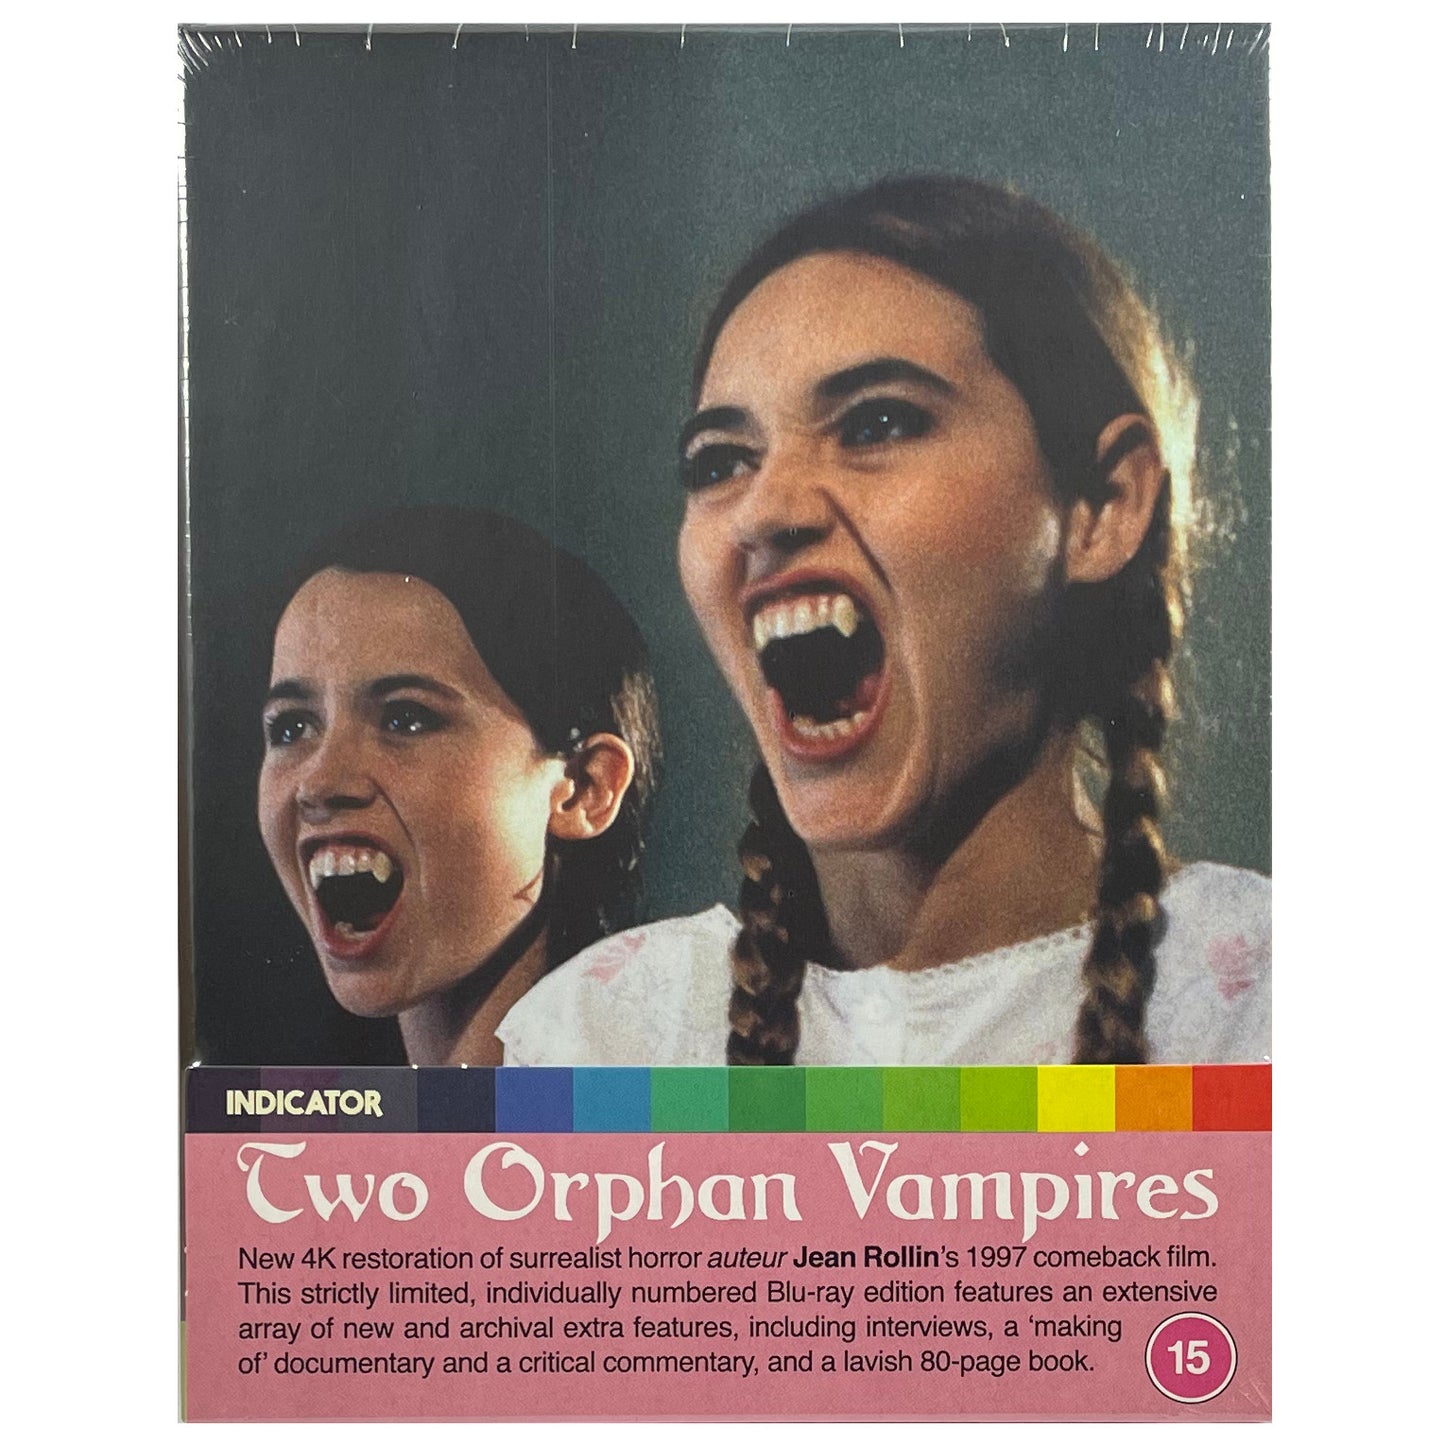 Two Orphan Vampires Blu-Ray - Limited Edition